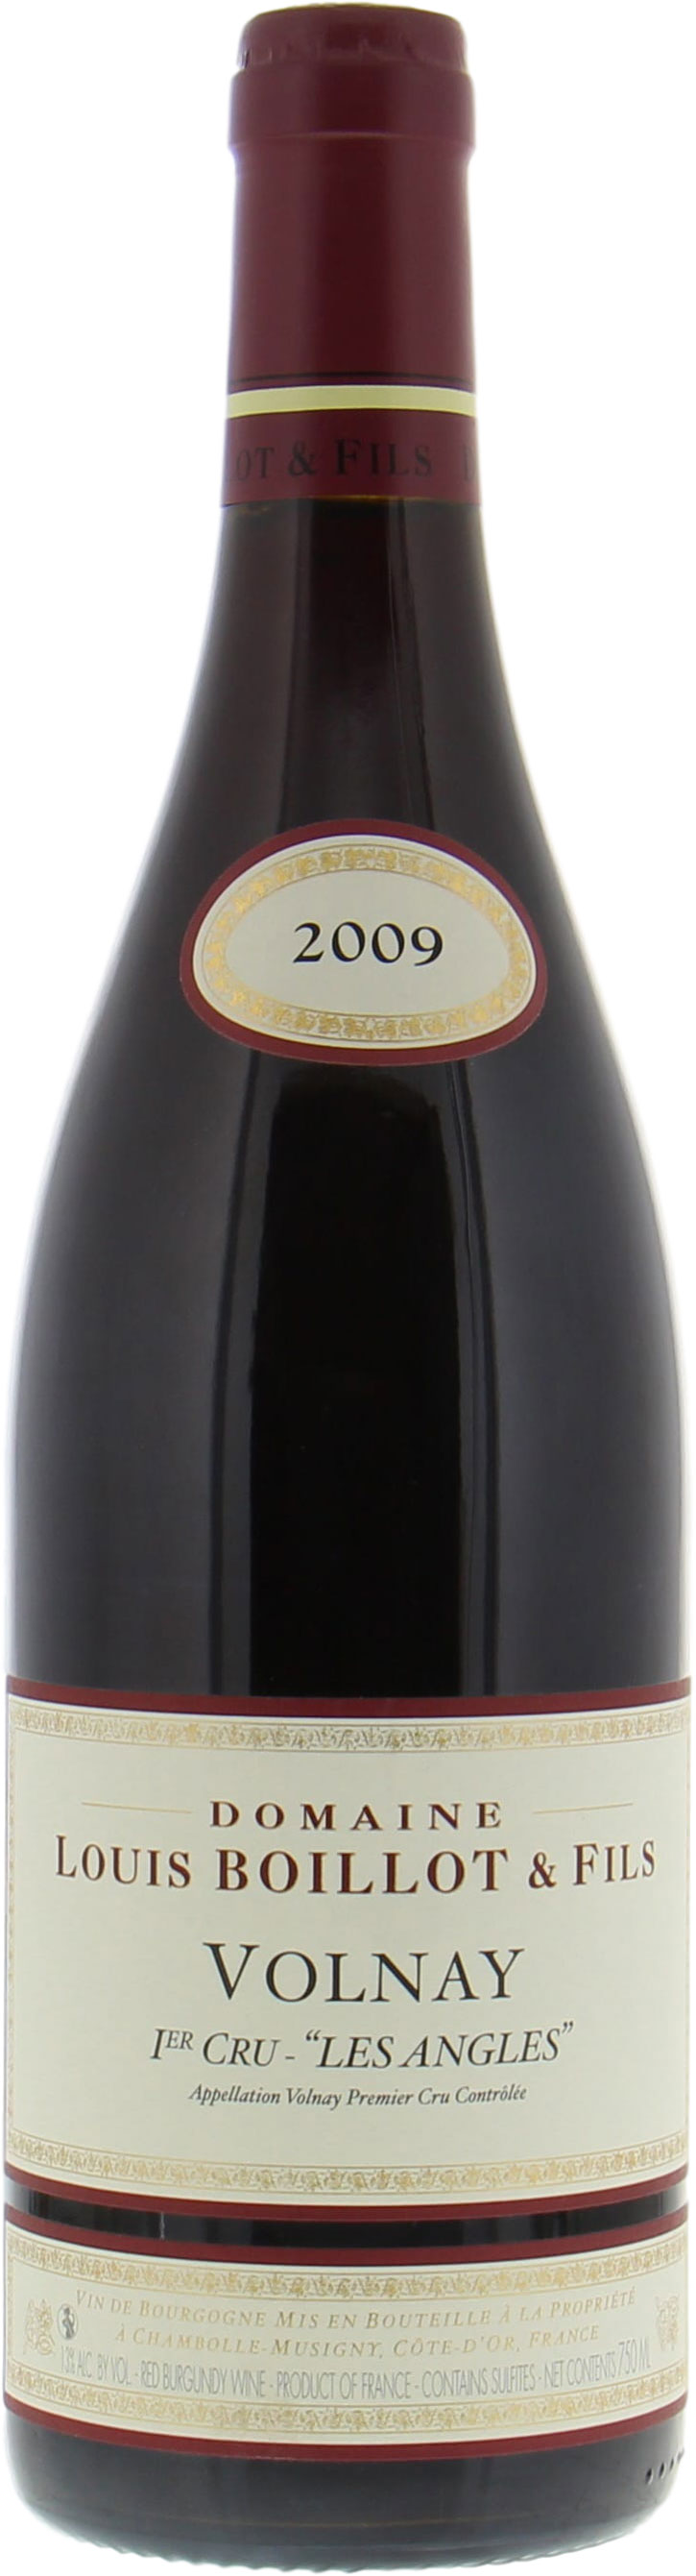 Domaine Louis Boillot - Volnay 1Er Cru les Angles 2009 Perfect